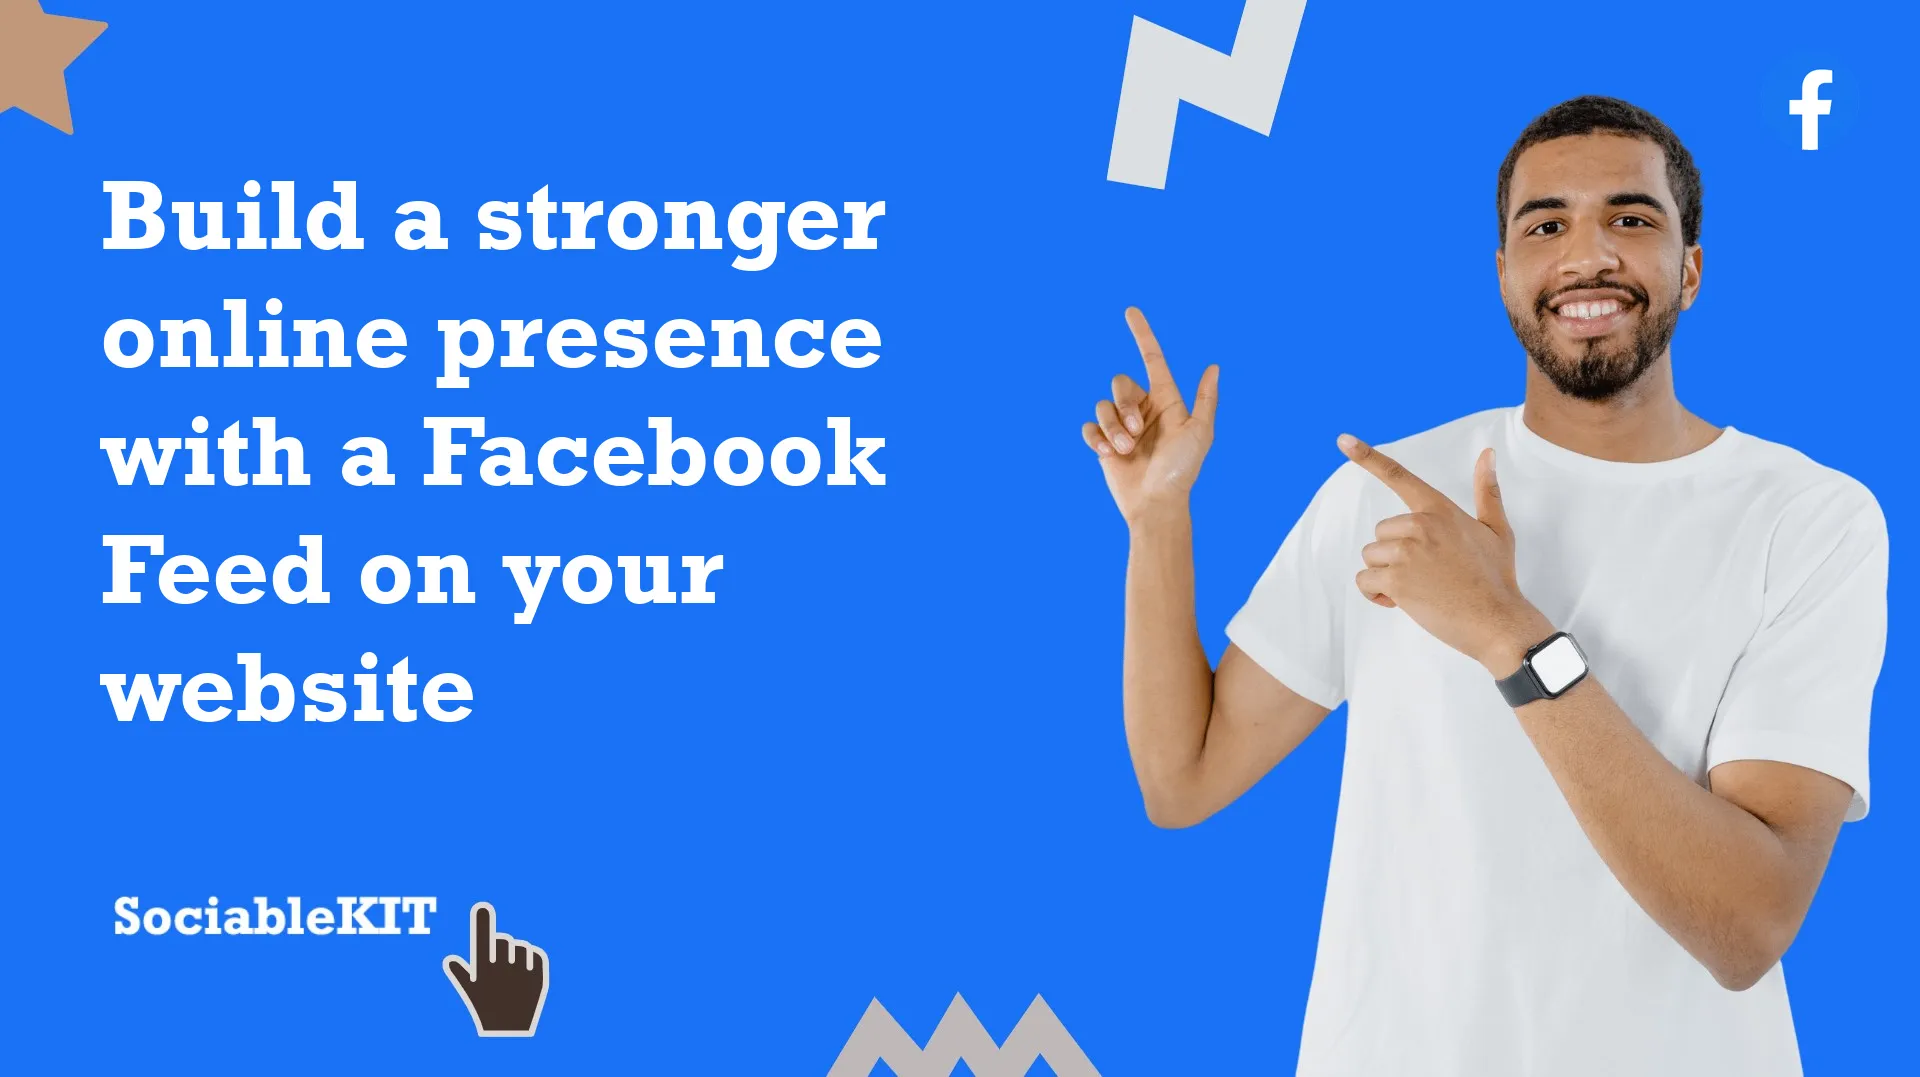 Build a stronger online presence with a Facebook Feed on your website